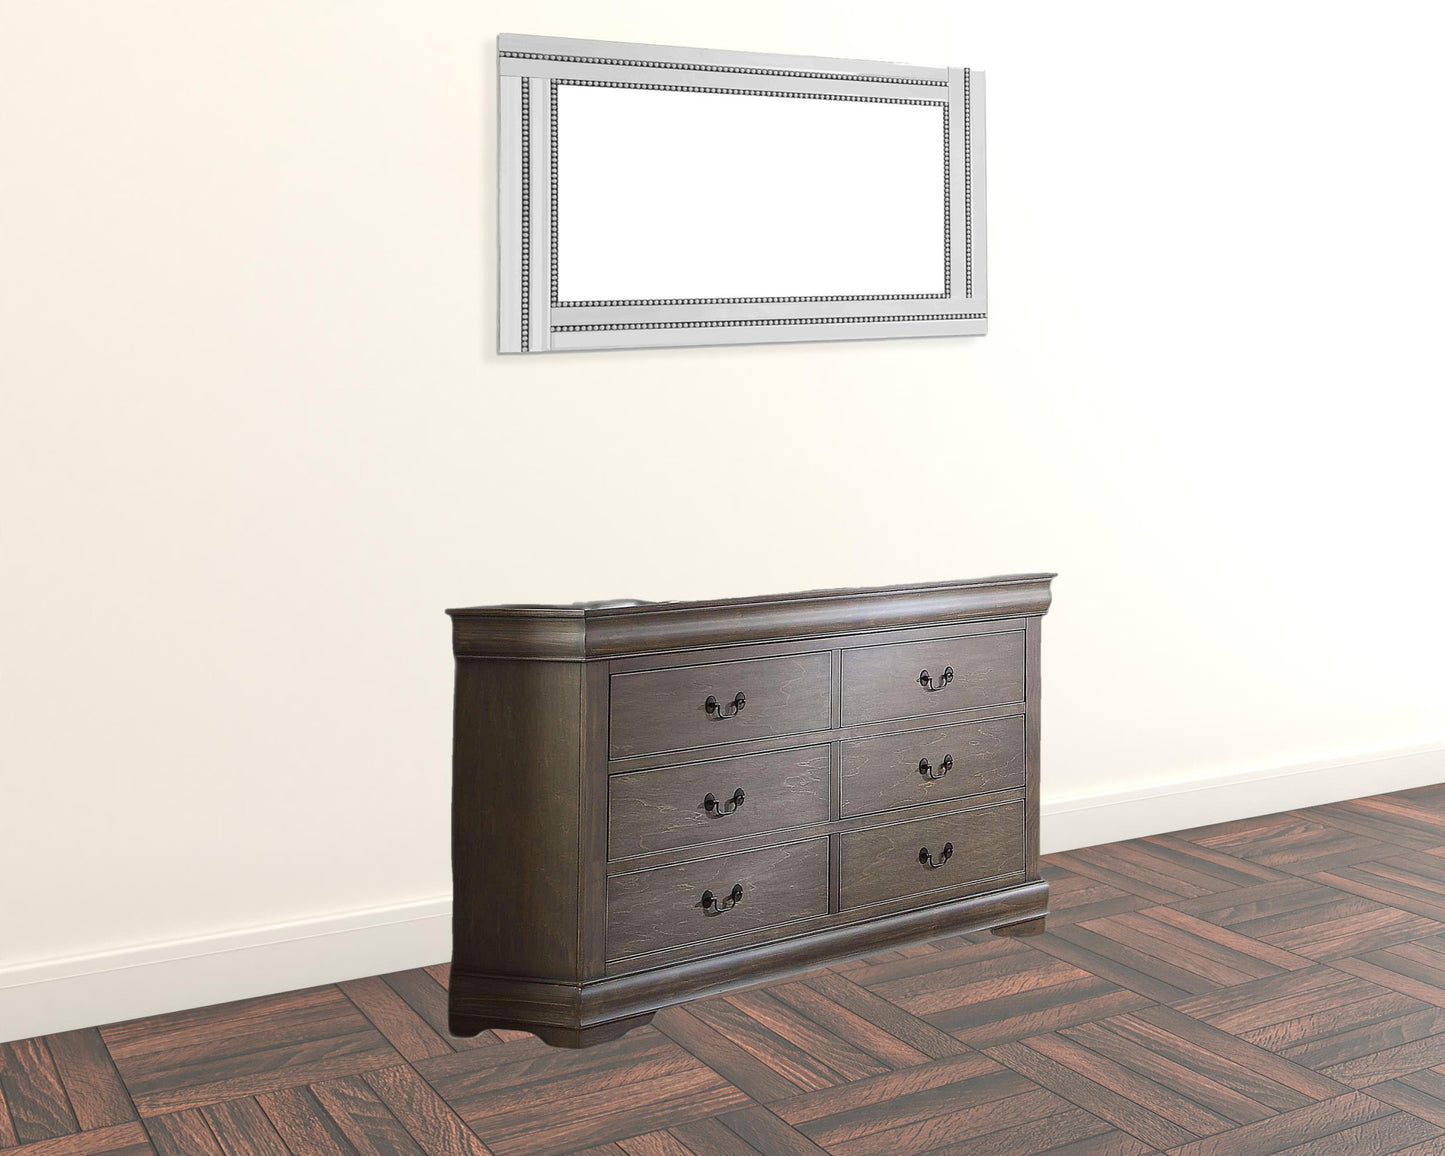 57" Gray Solid Wood Six Drawer Double Dresser